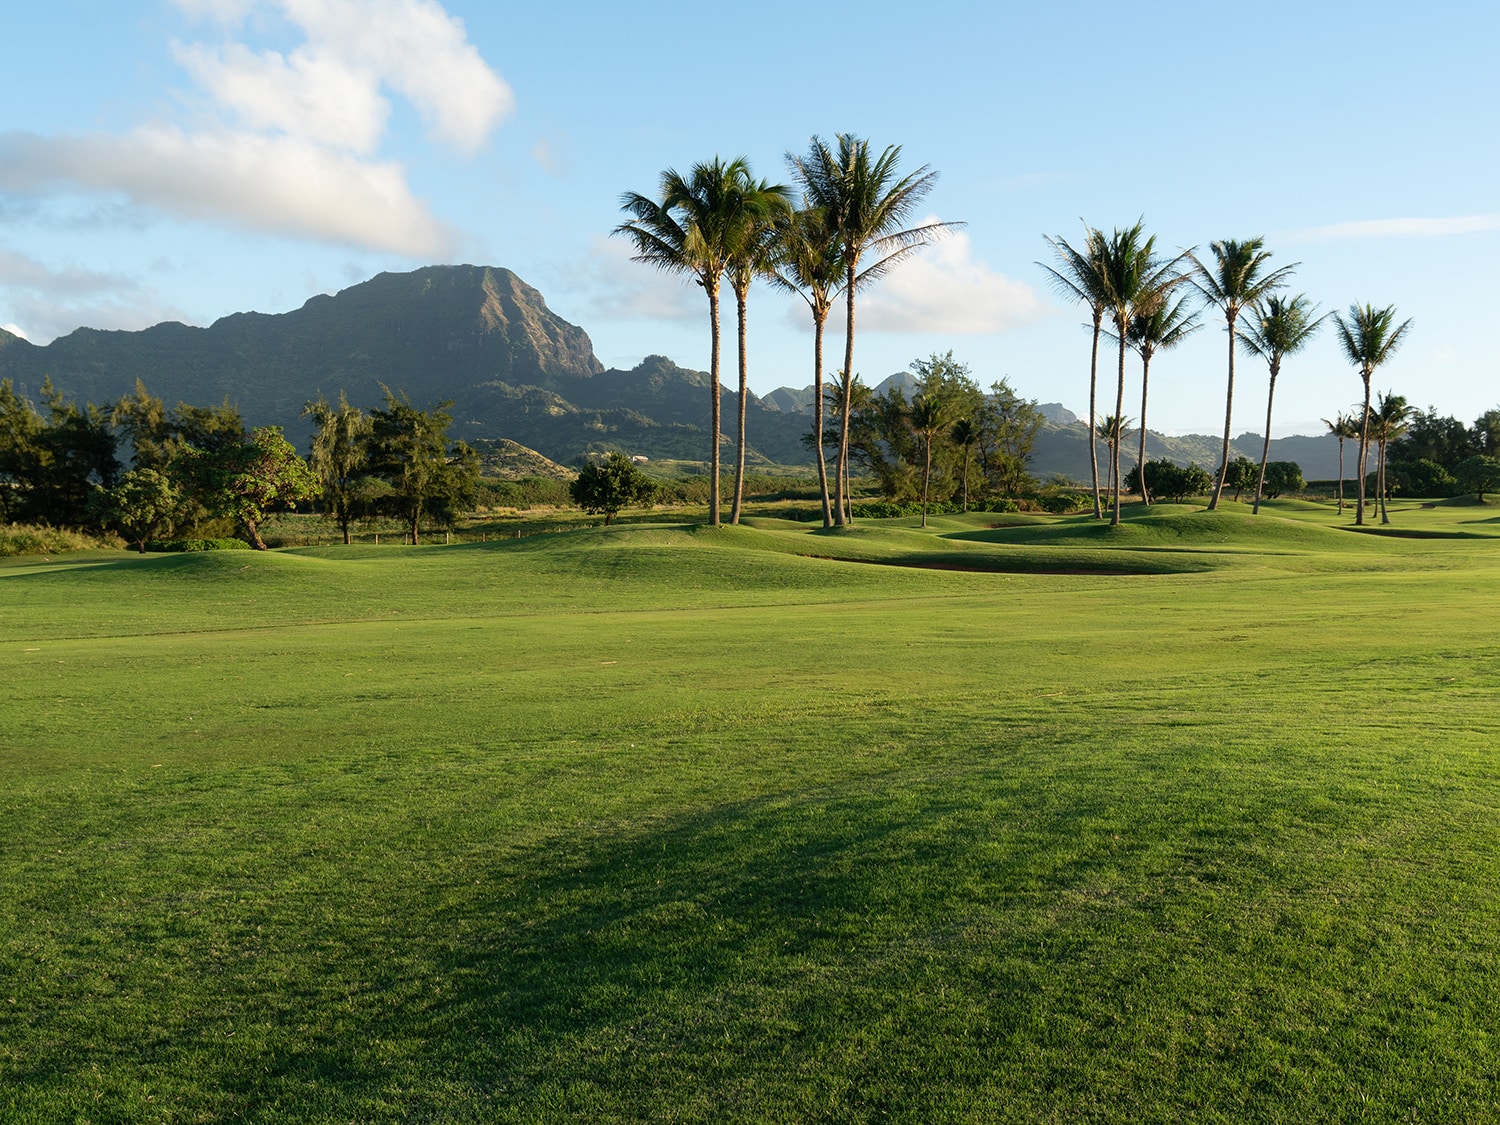 Best things to do in Kauai, Hawaii - Playing golf at the Poipu Bay Golf Course